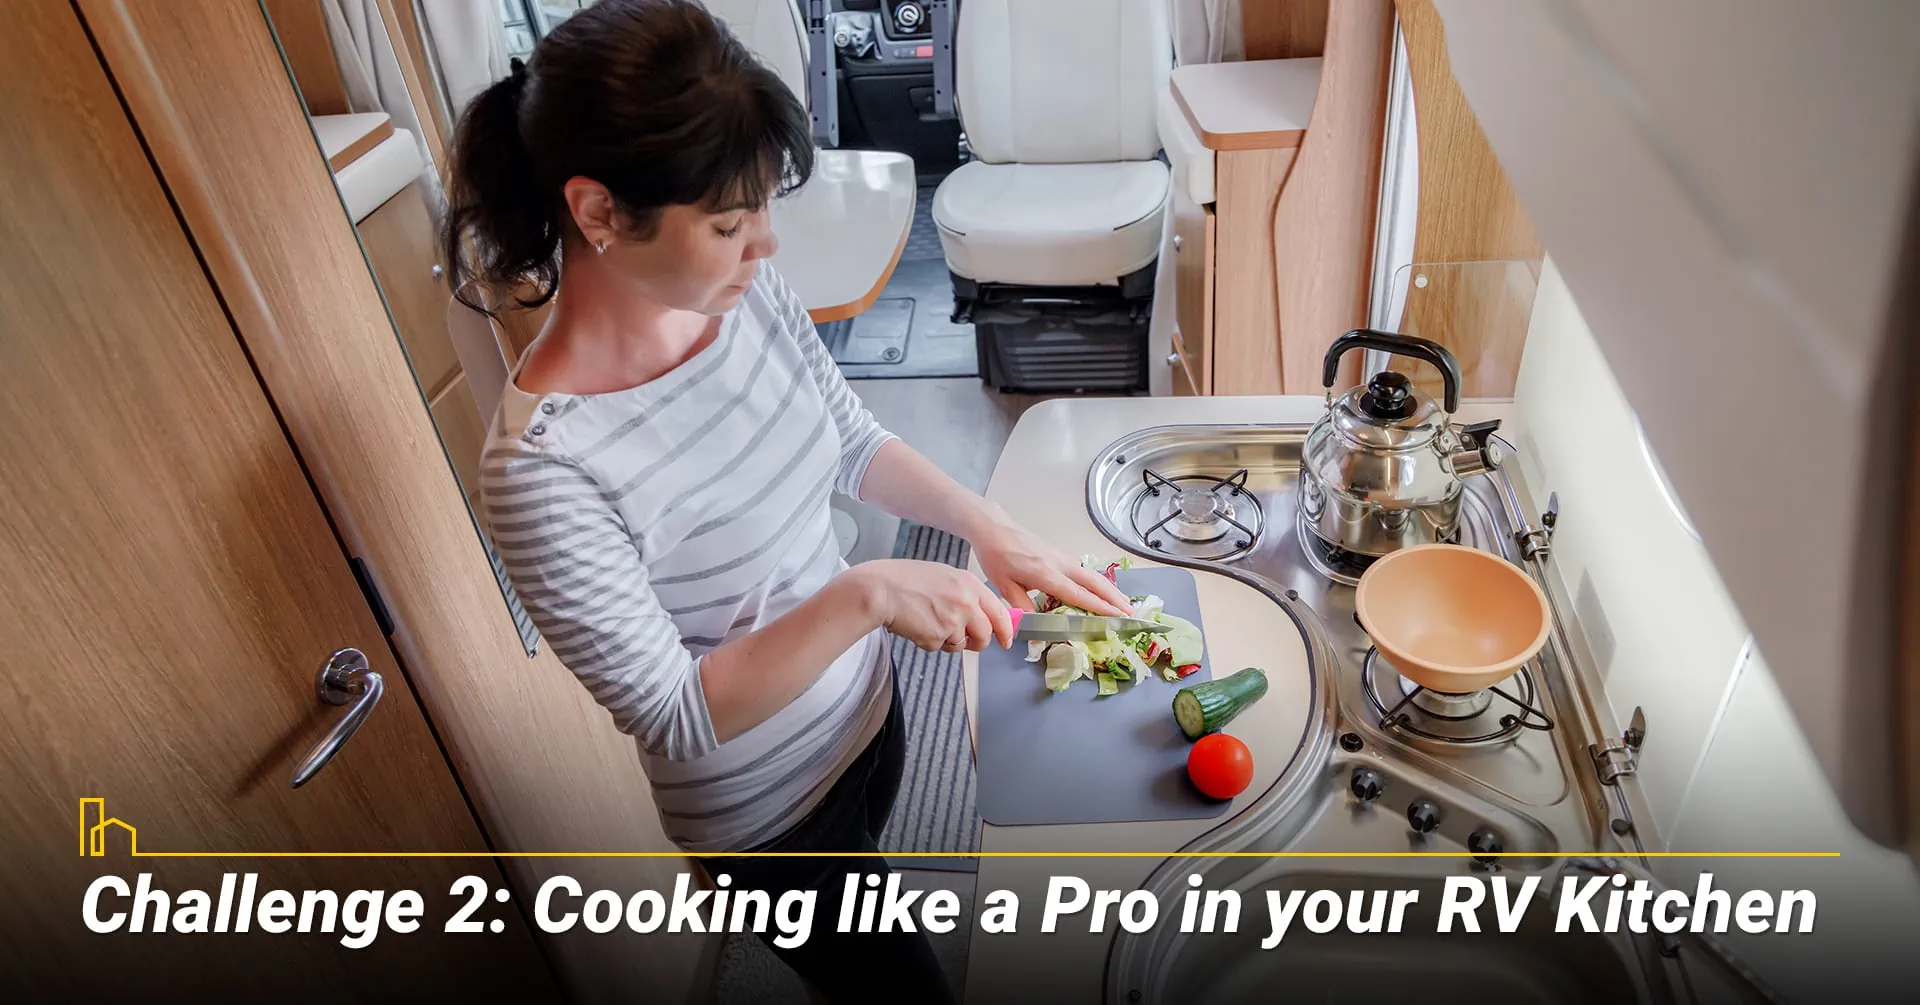 Challenge 2: Cooking like a Pro in your RV Kitchen